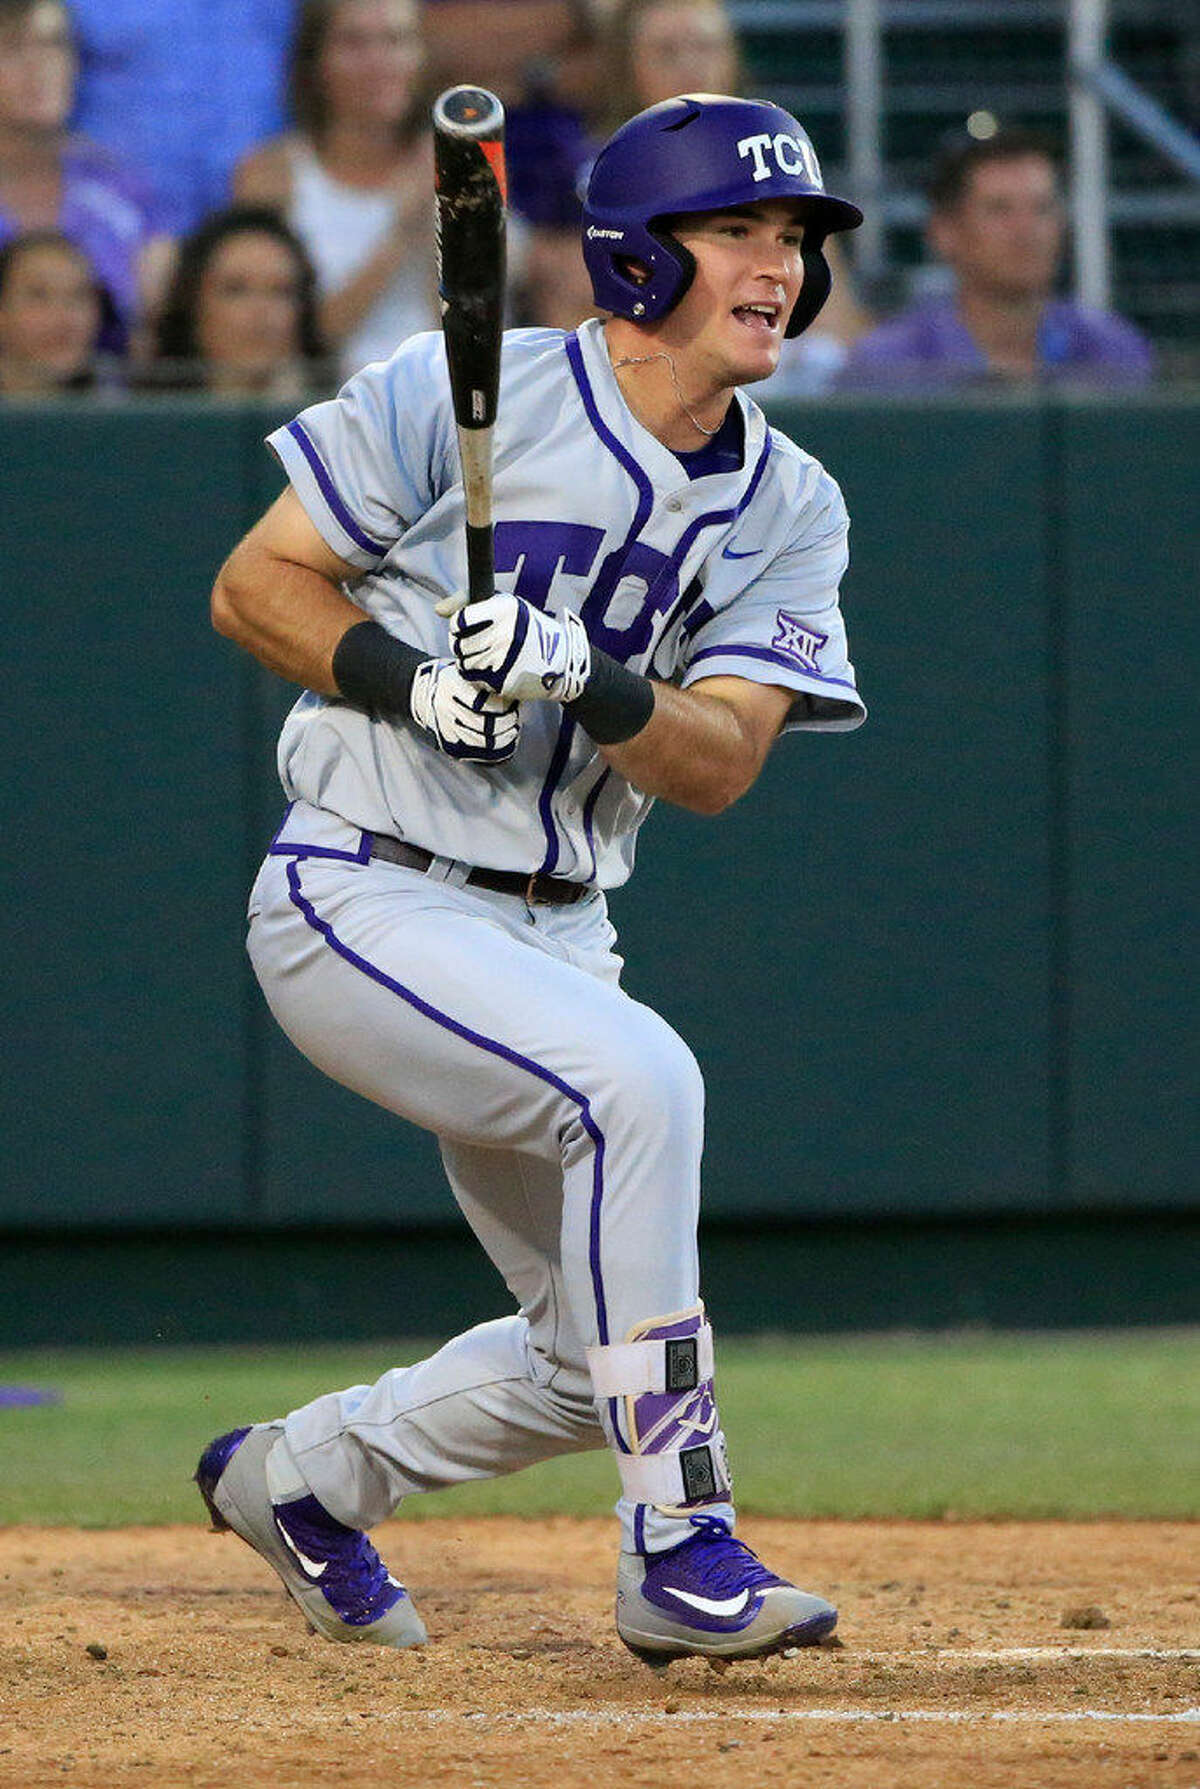 TCU's Austen Wade drives in a run against Arizona State in the eighth inning of an NCAA college baseball regional tournament game in Fort Worth, Texas, Sunday, June 5, 2016. TCU won 8-1. (AP Photo/Ron Jenkins)